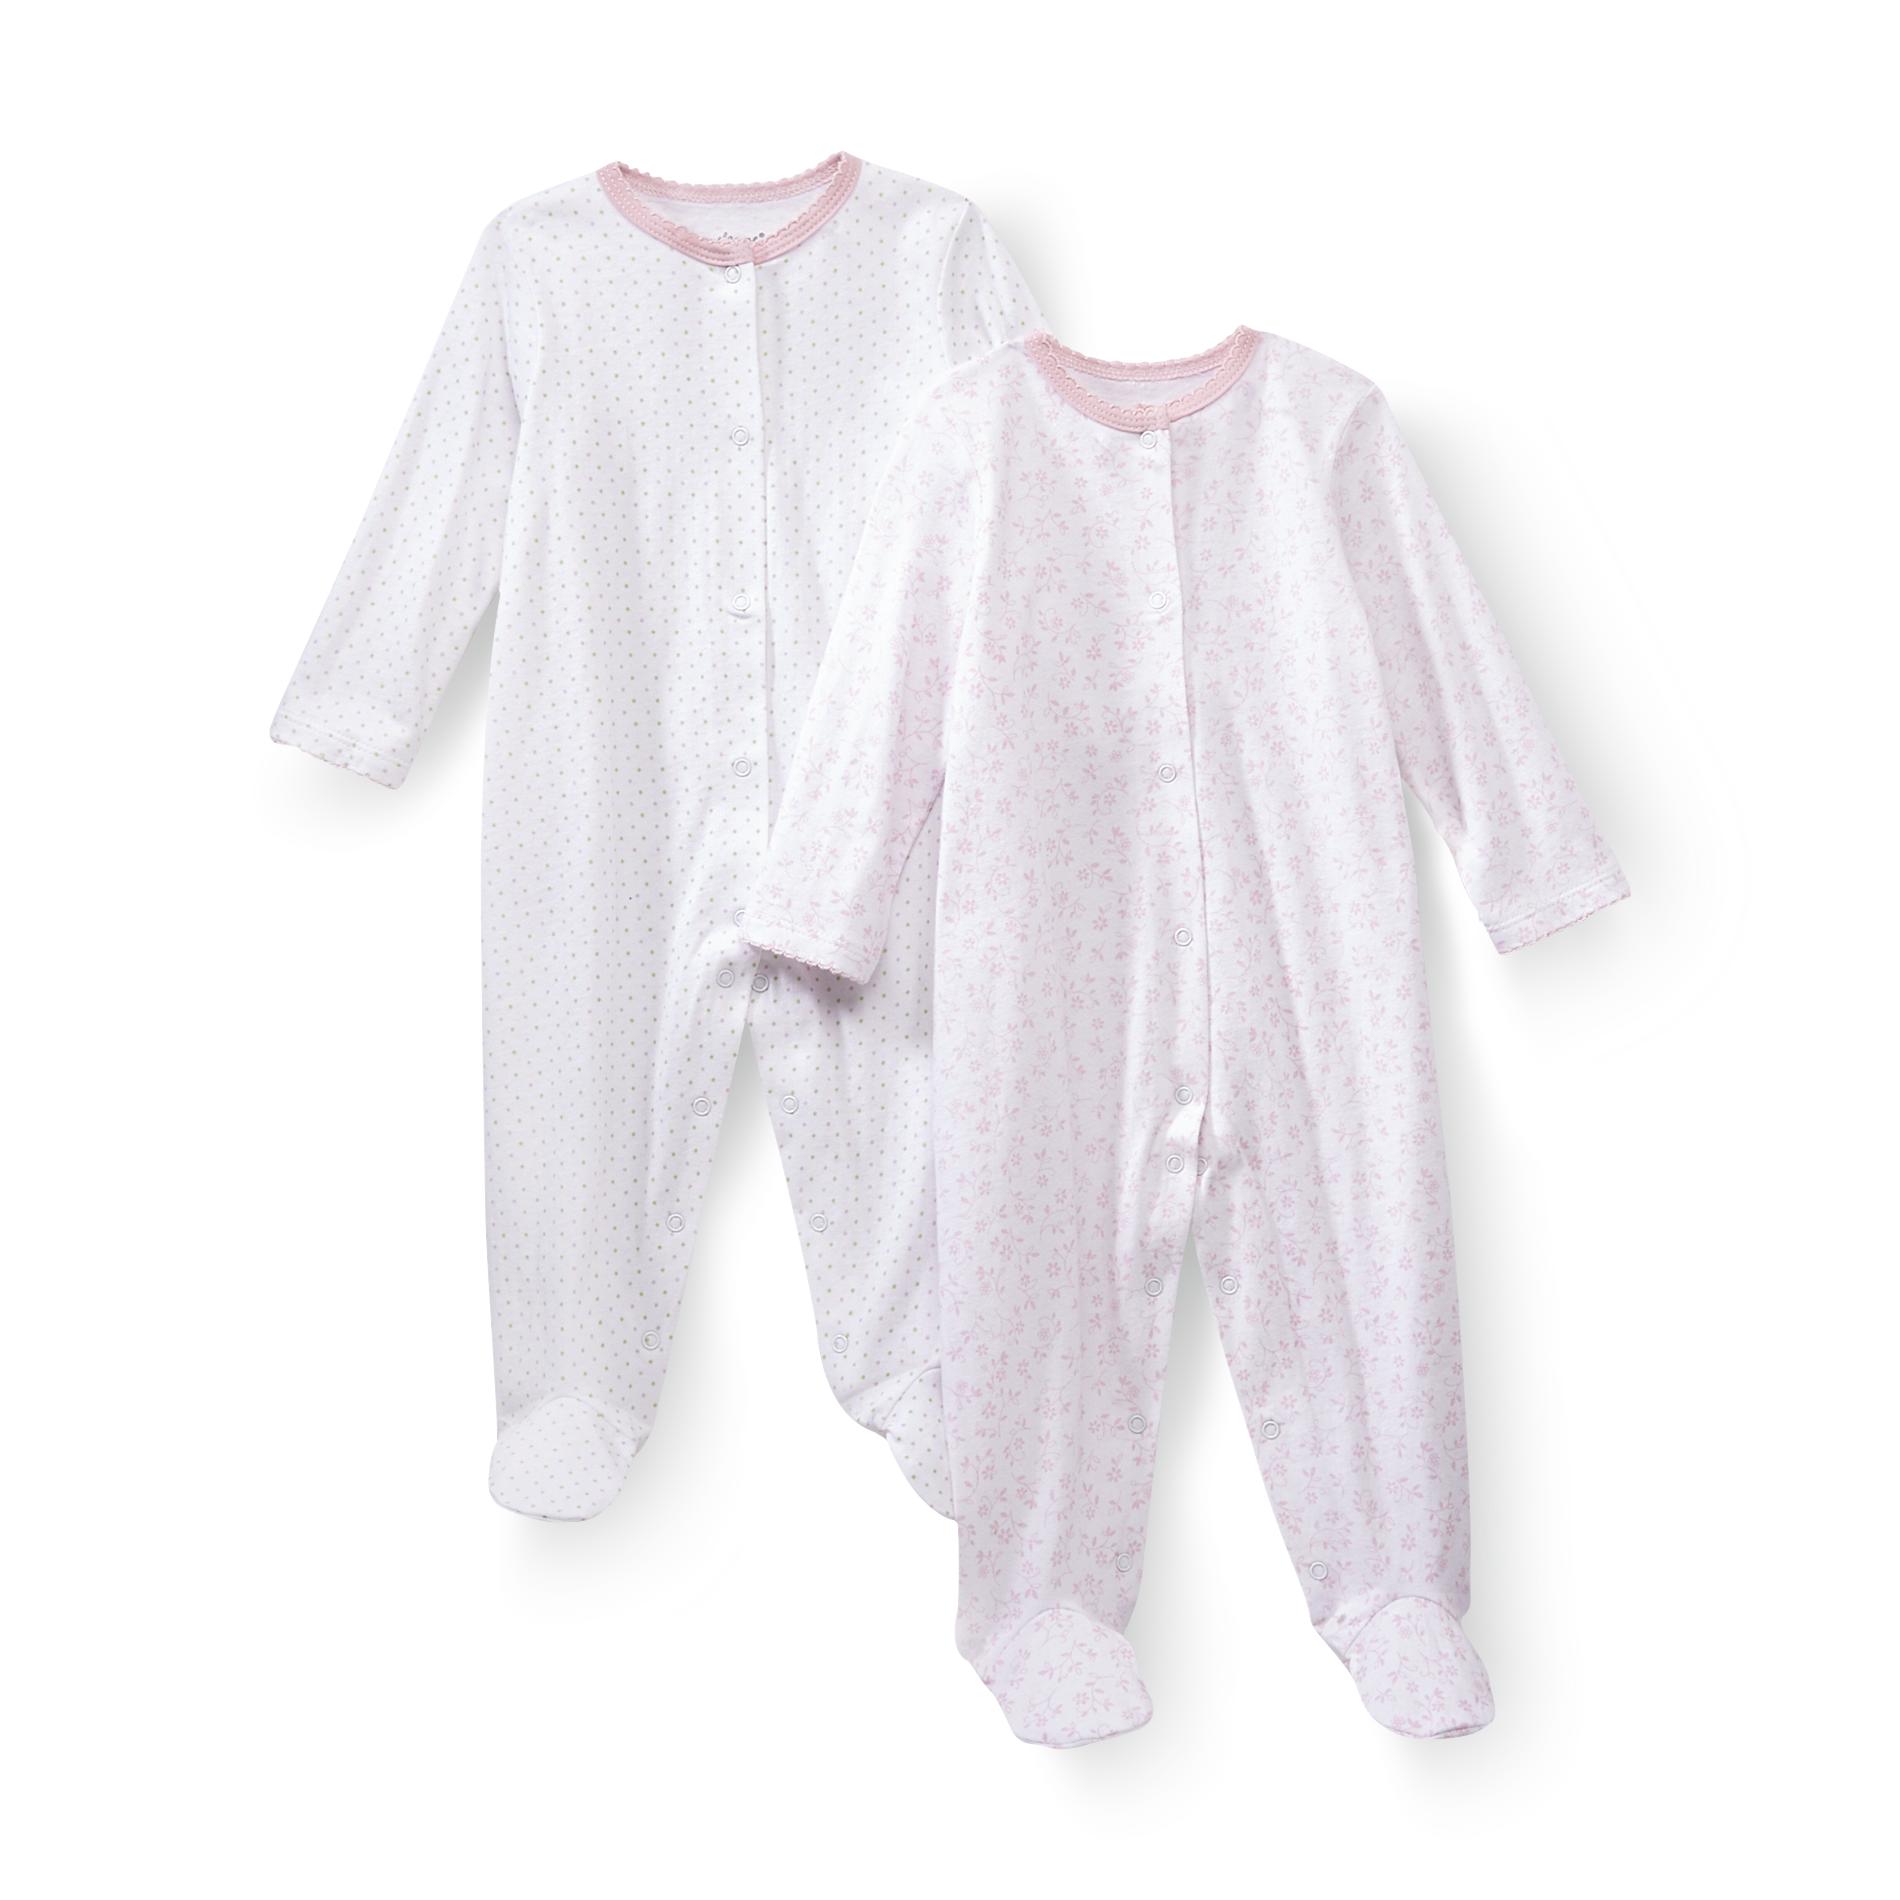 Welcome to the World Newborn Girl's 2-Pack Sleeper Pajamas - Floral & Polka-Dots